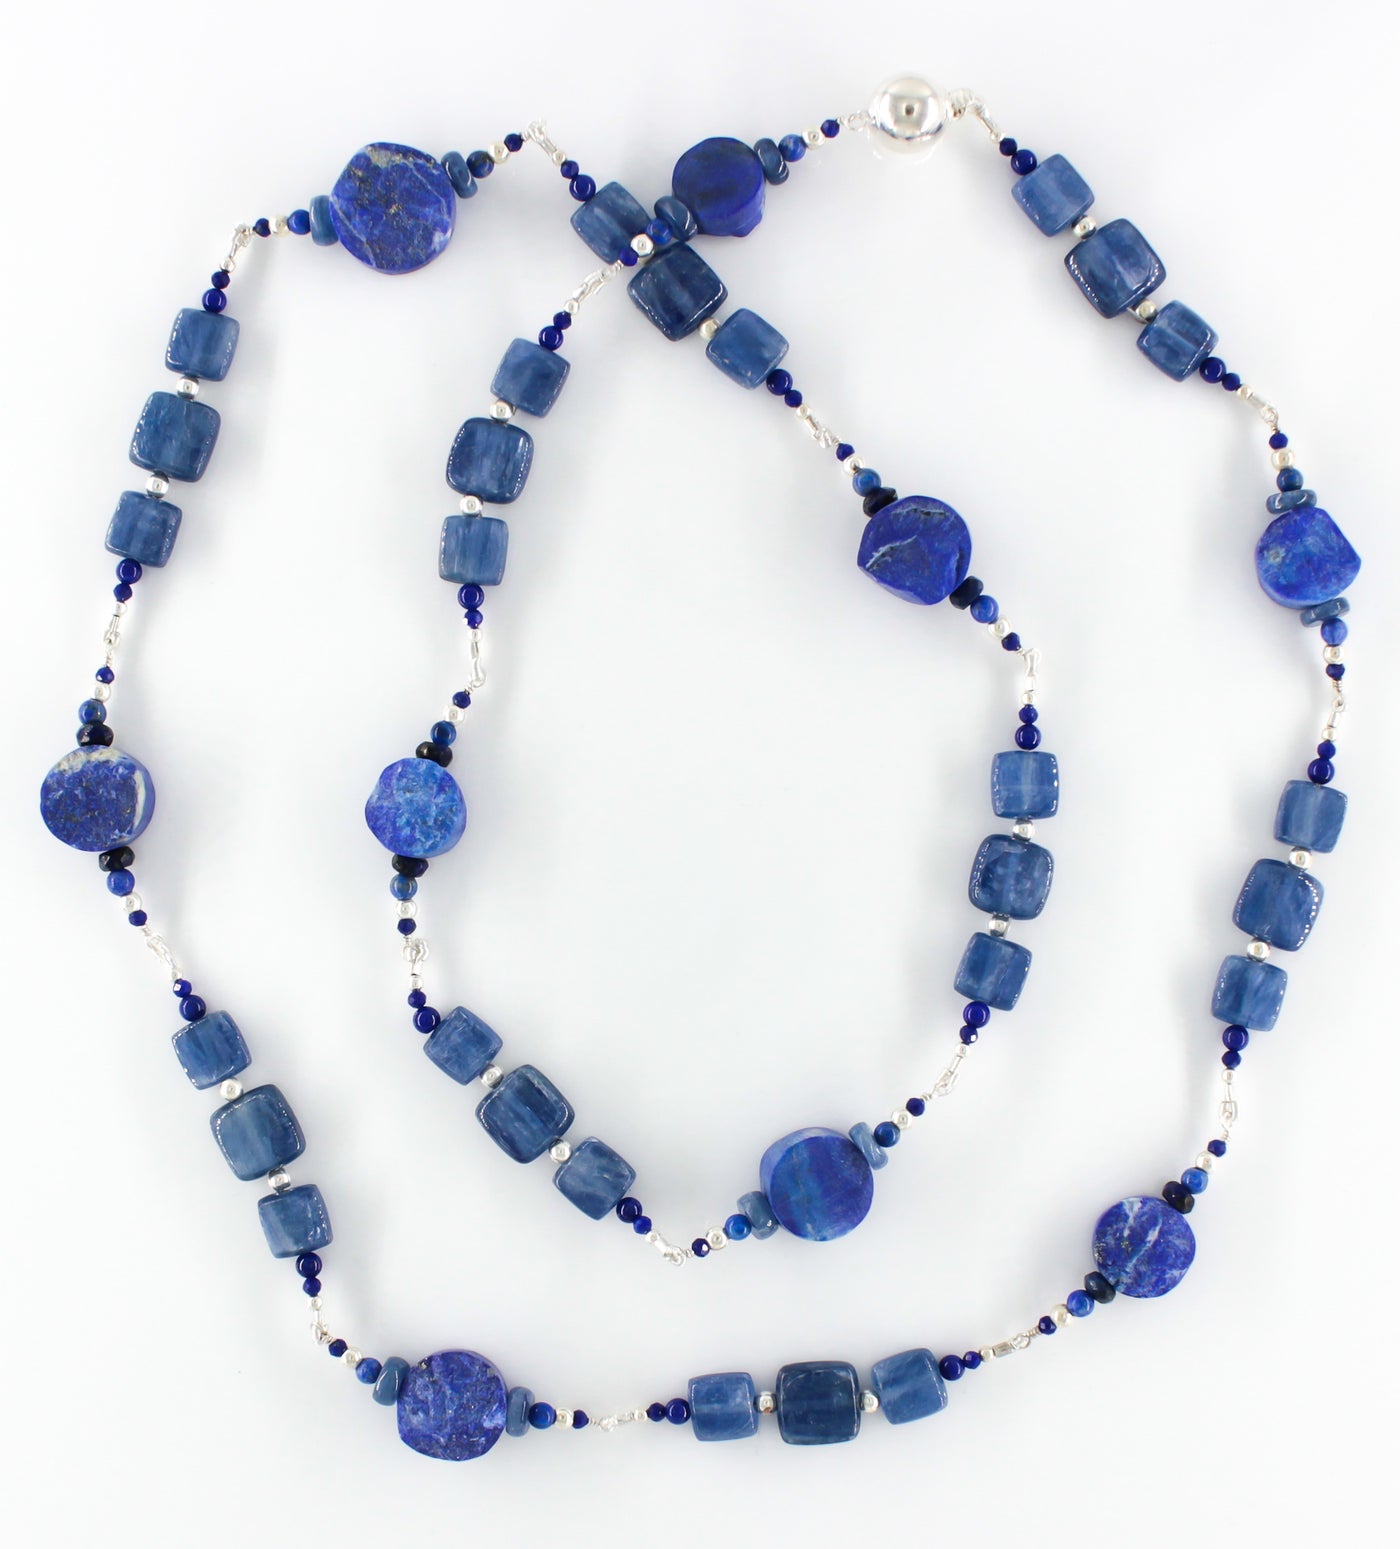 Sterling Silver Segmented Gem Bead Necklaces